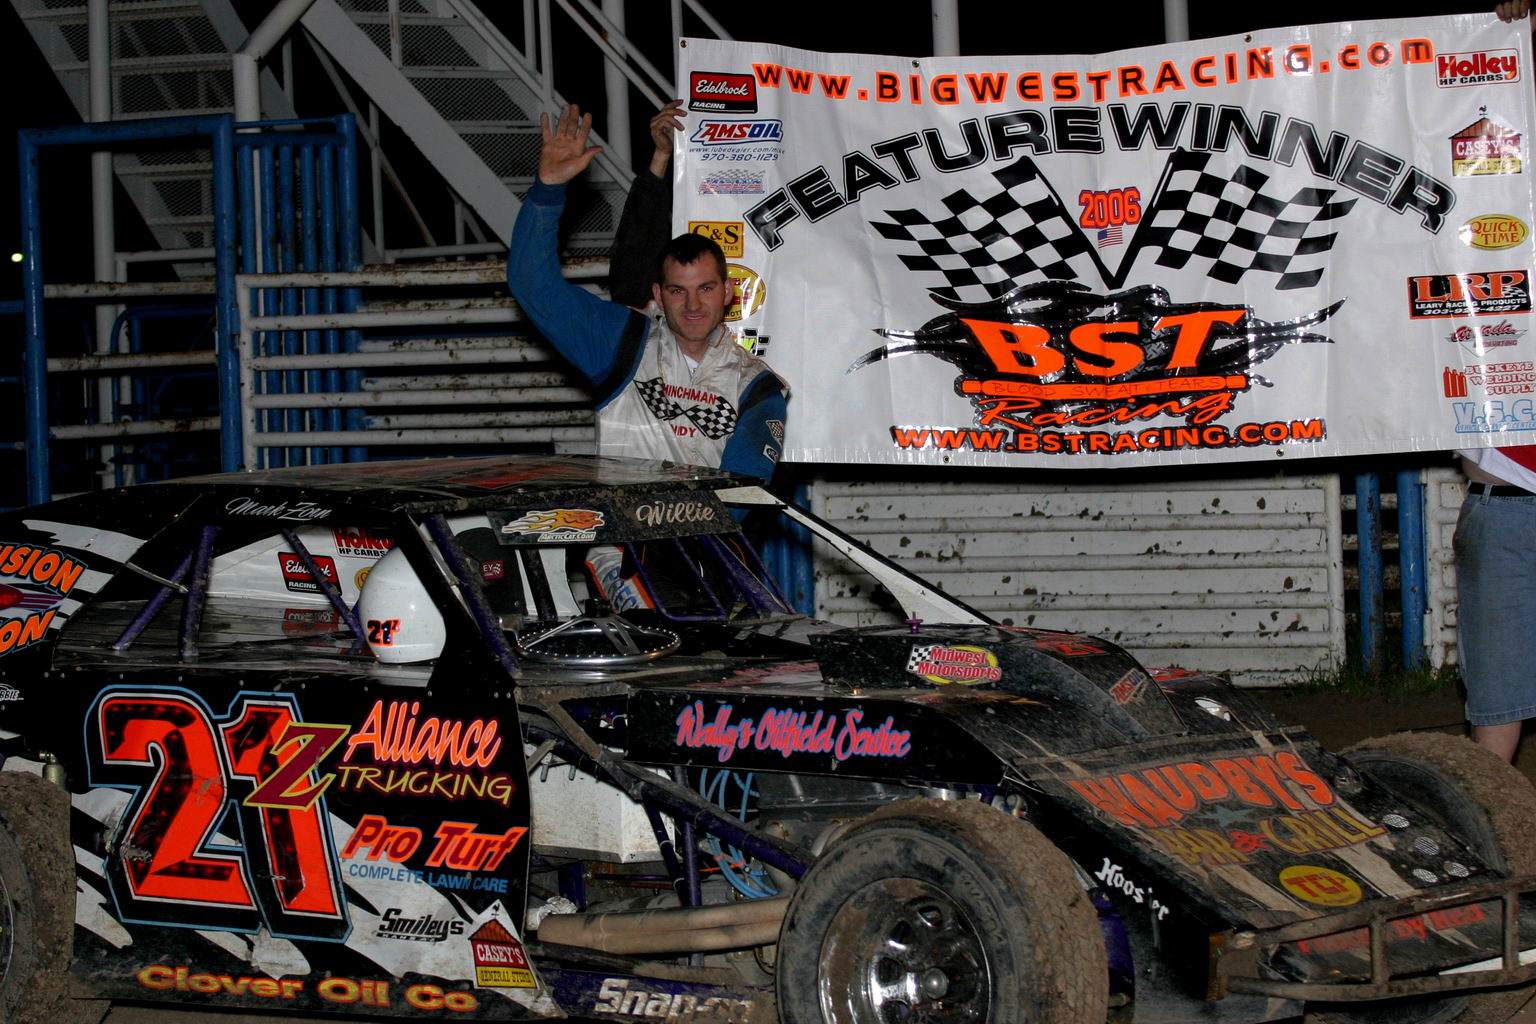 USRA hot shoe Mark Zorn took his Alliance Trucking #21z to the USRA/BST Bigwestracing.com winners circle, earning him valuable points in the USRA Casey's General Stores Weekly Racing Series points chase. (Ron Olds/PRO Sport Photos)